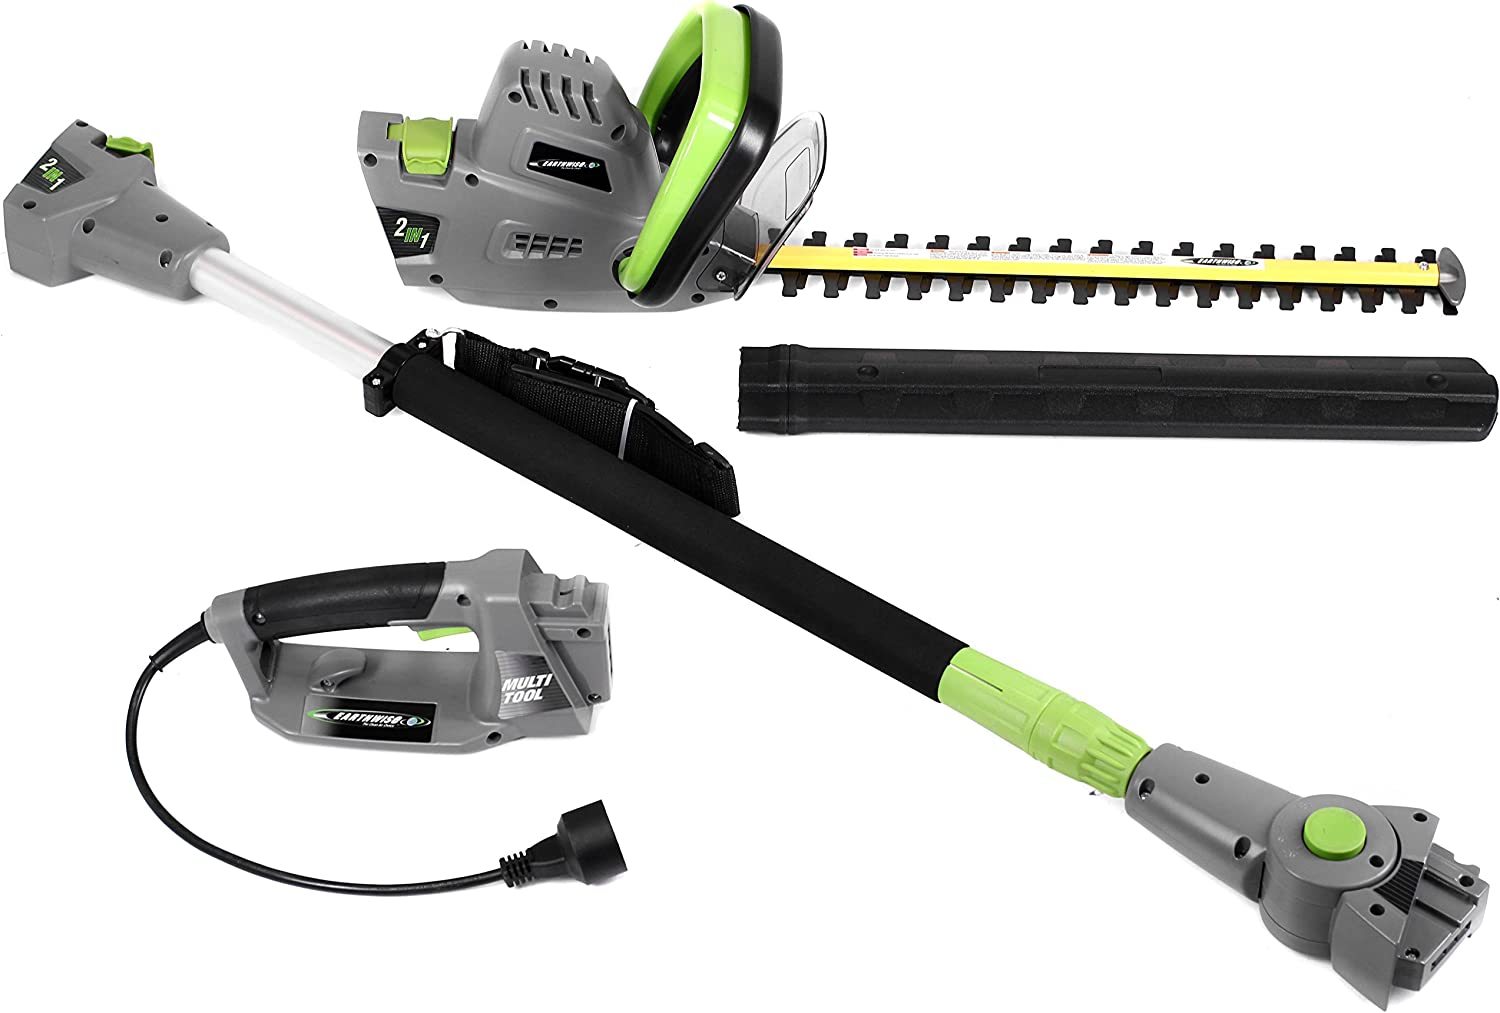 Primary image for Earthwise Cvph43018 Corded 4 Point 5 Amp 2-In-1 Pole Hedge Trimmer, Grey